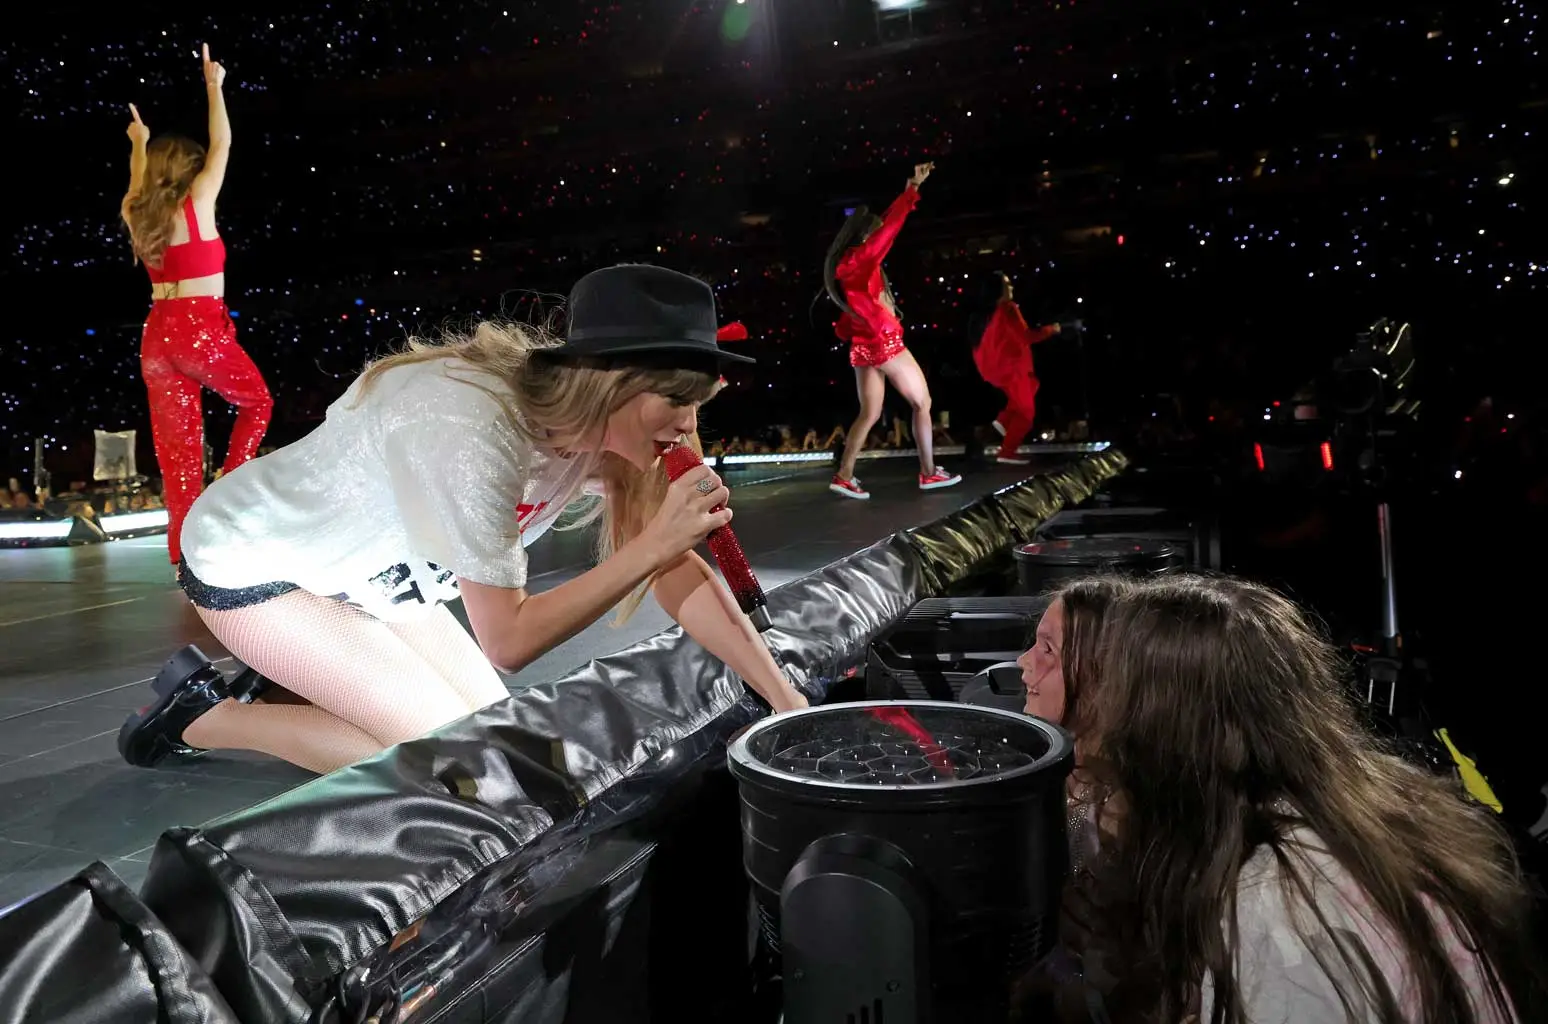 This Adorable Video of Taylor Swift Giving Her "22" Hat to a Young Girl With Cancer Will Make You Weep Full Story below.